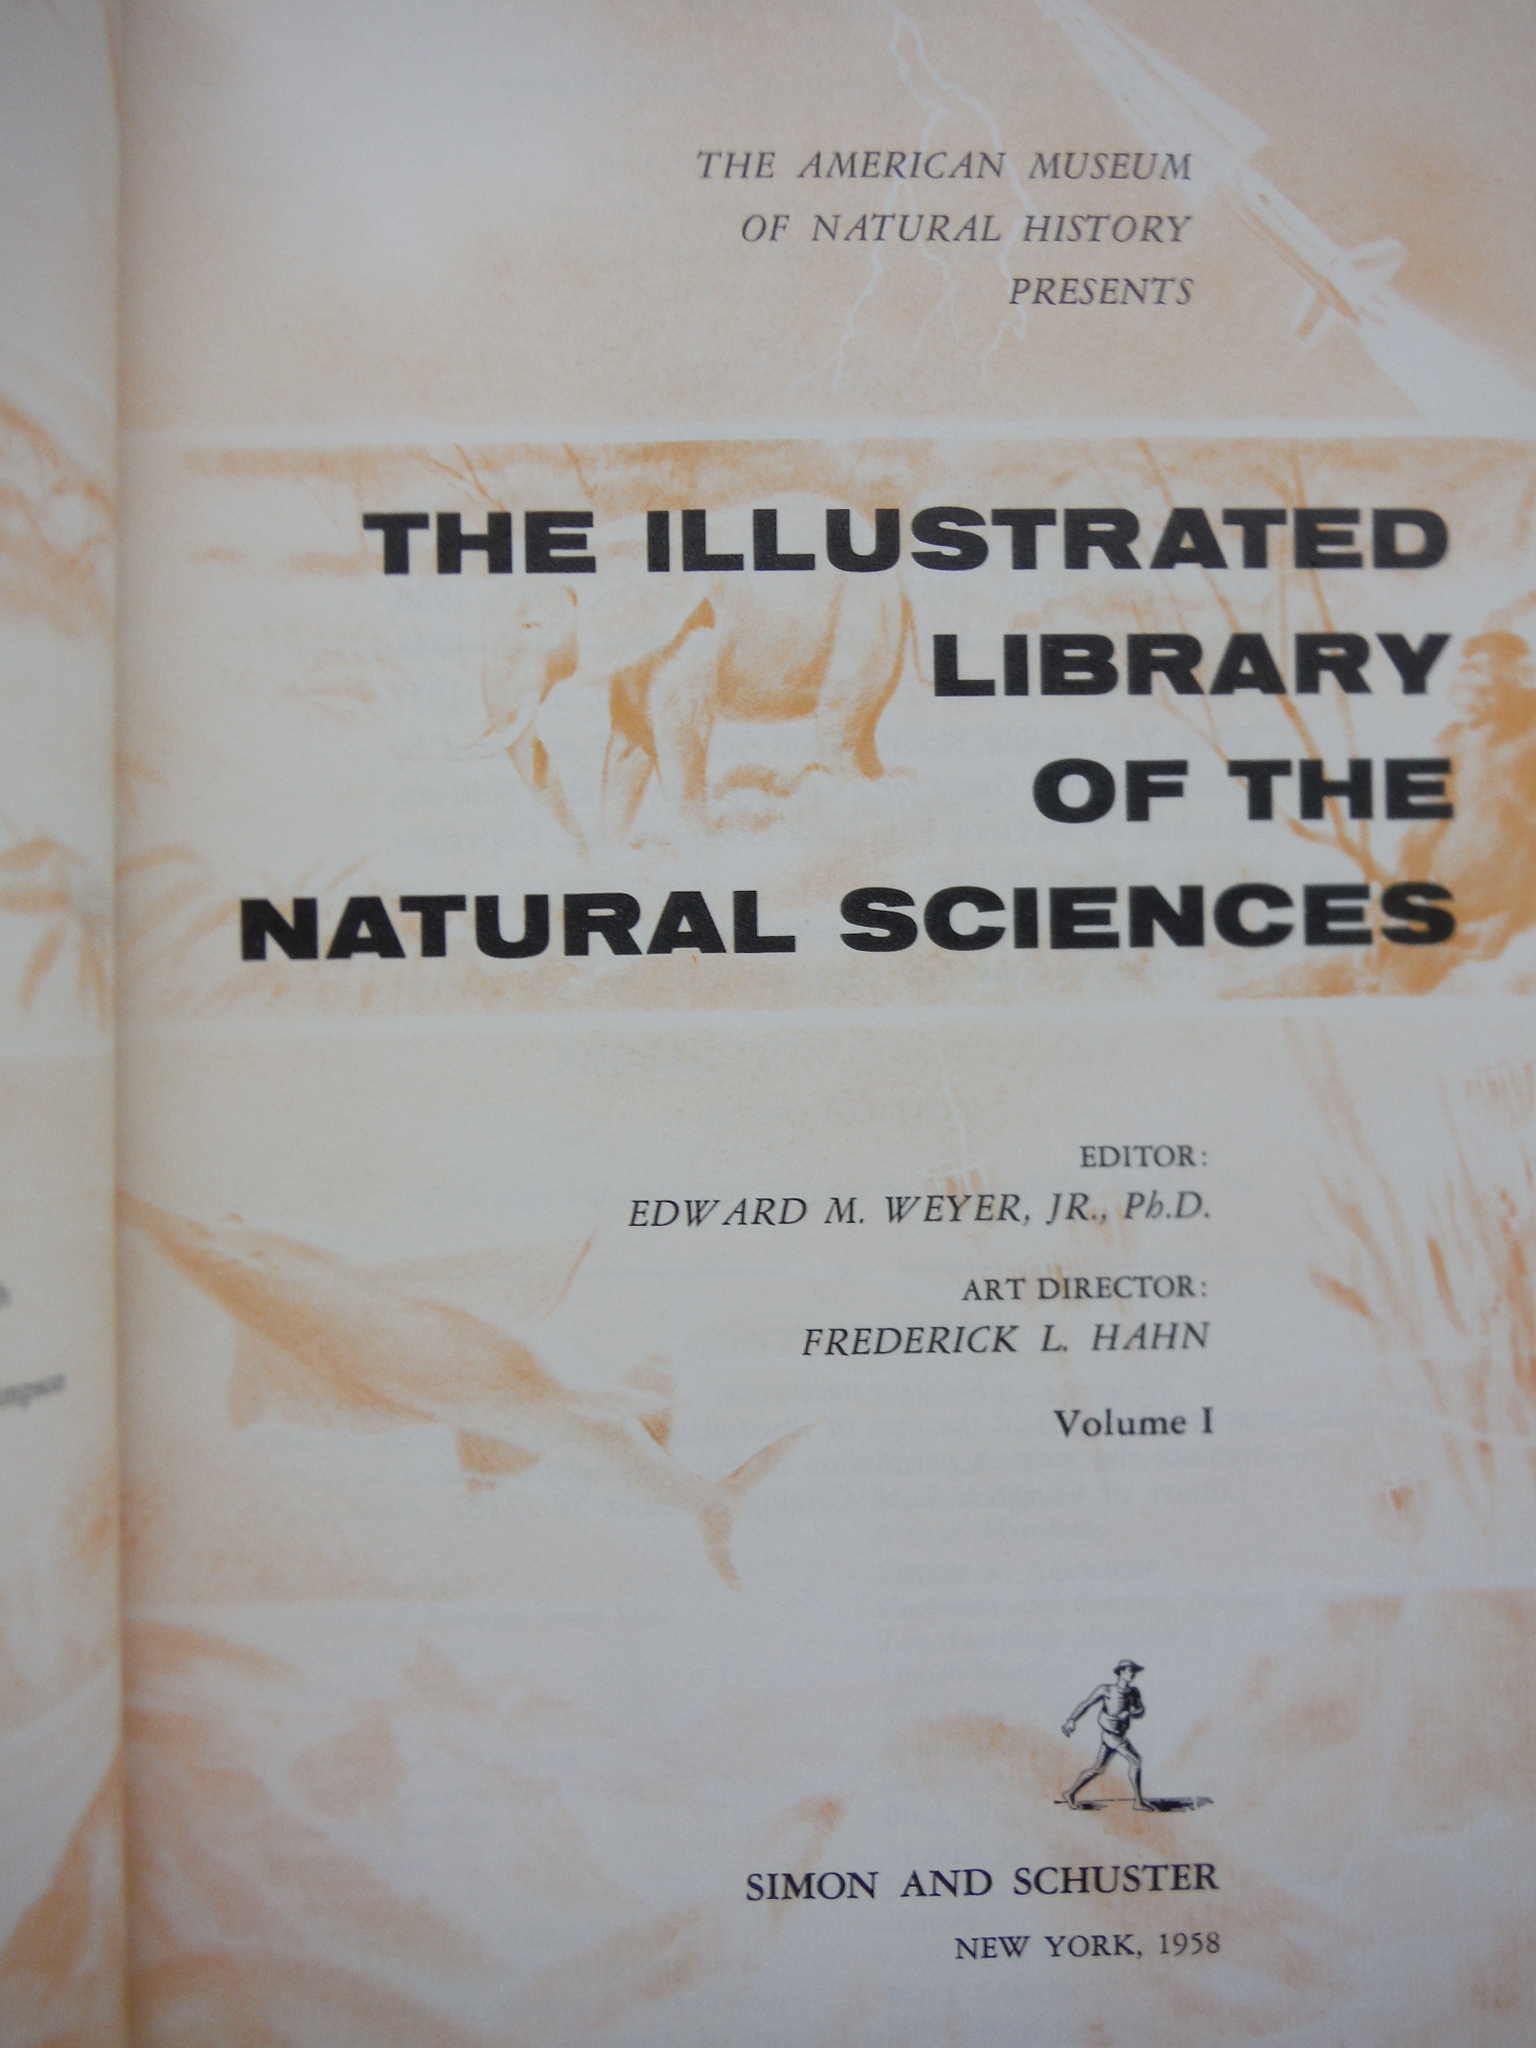 Image 2 of The Illustrated Library of the Natural Sciences